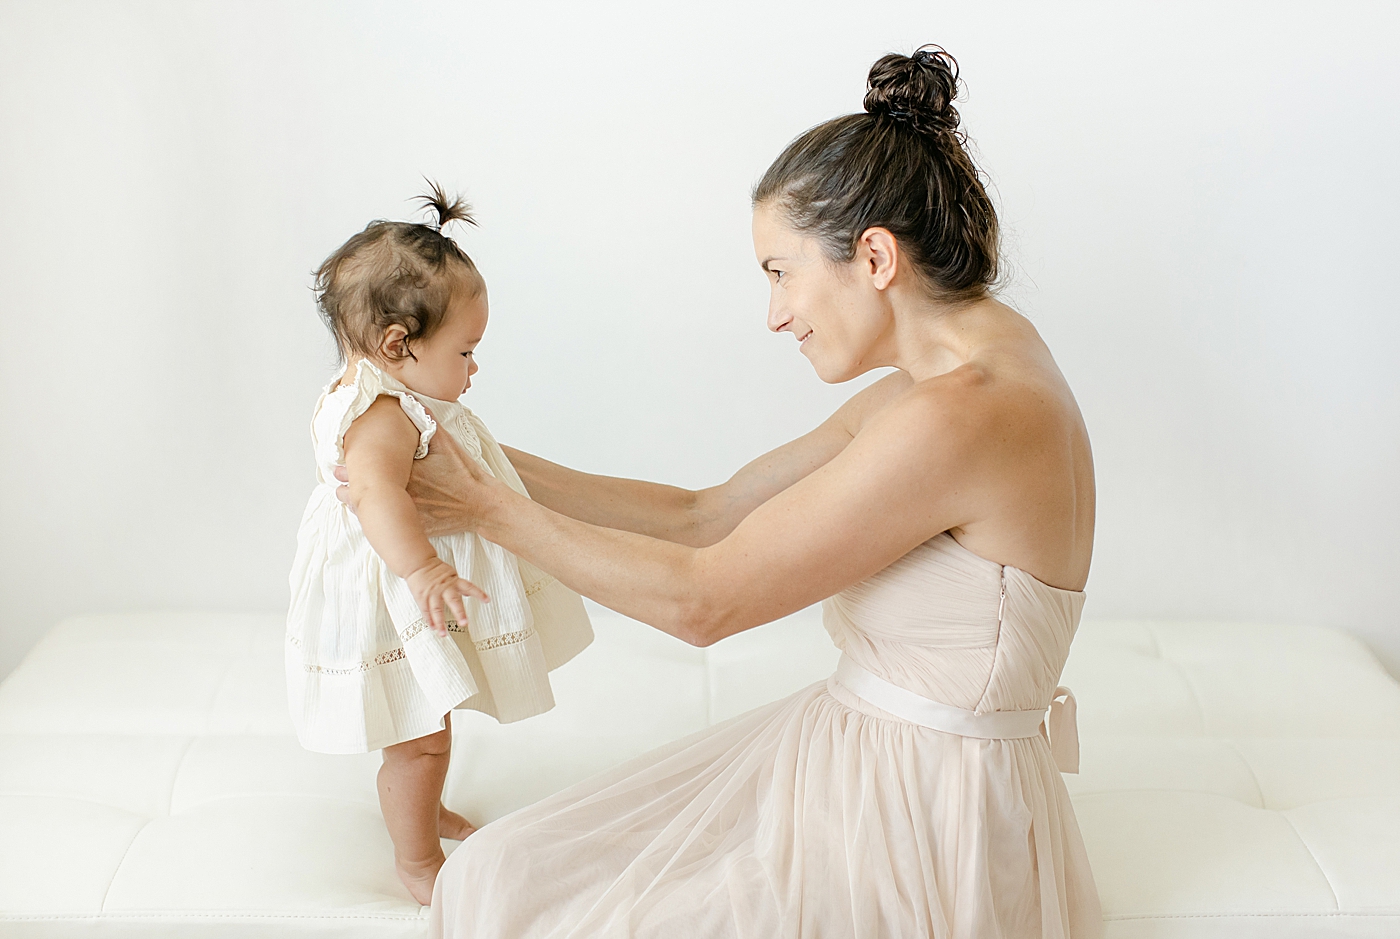 Mom and baby girl sitting on a white bed | Image by Chrissy Winchester Photography